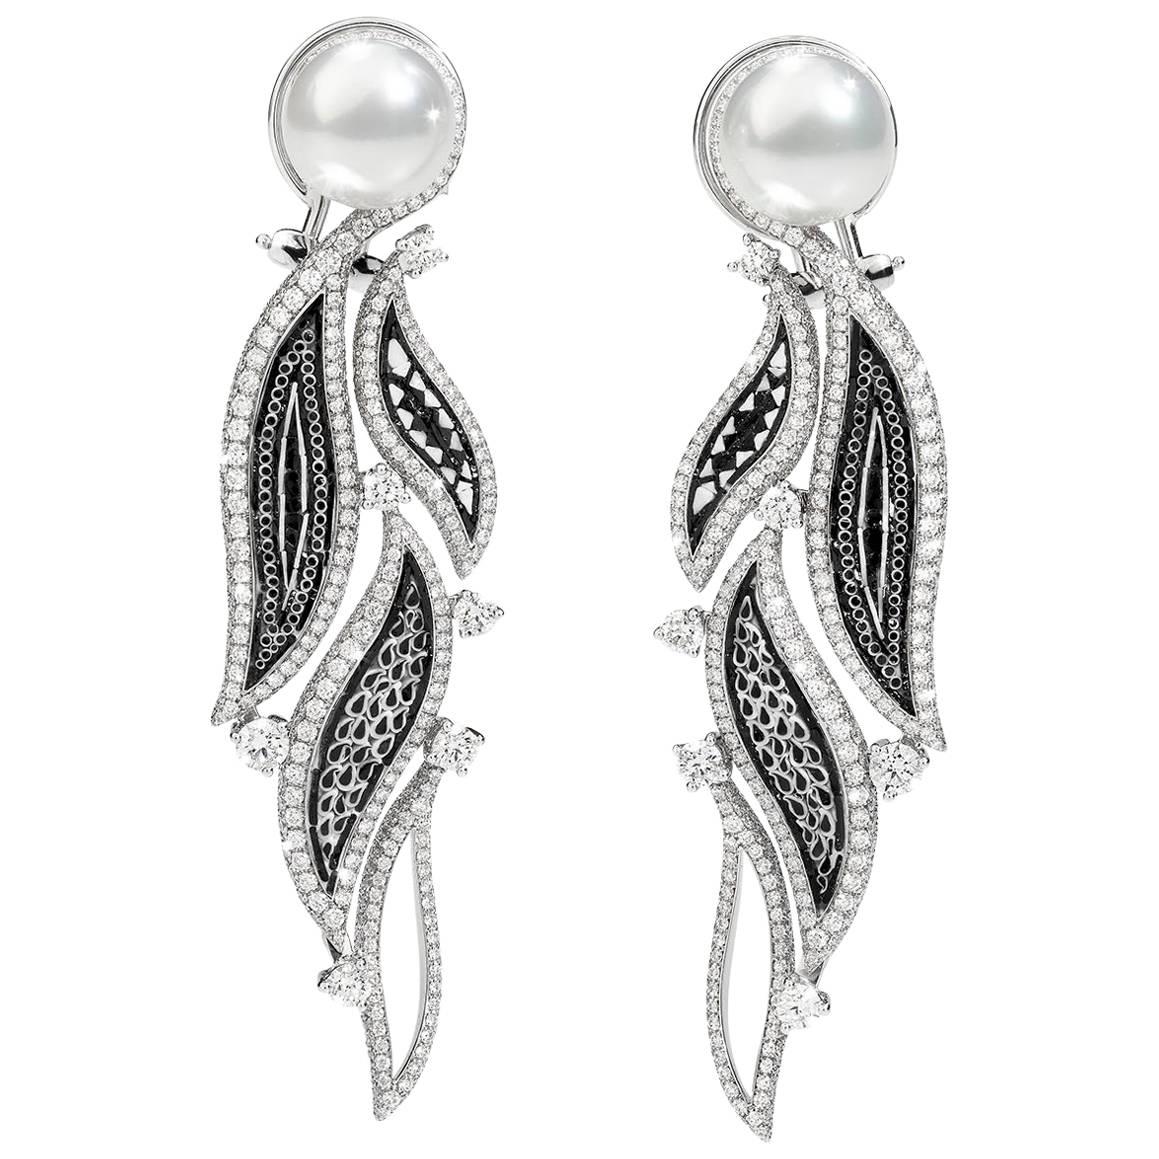 Stylish Earrings White Diamonds White Gold Pearls HandDecorated with Micromosaic